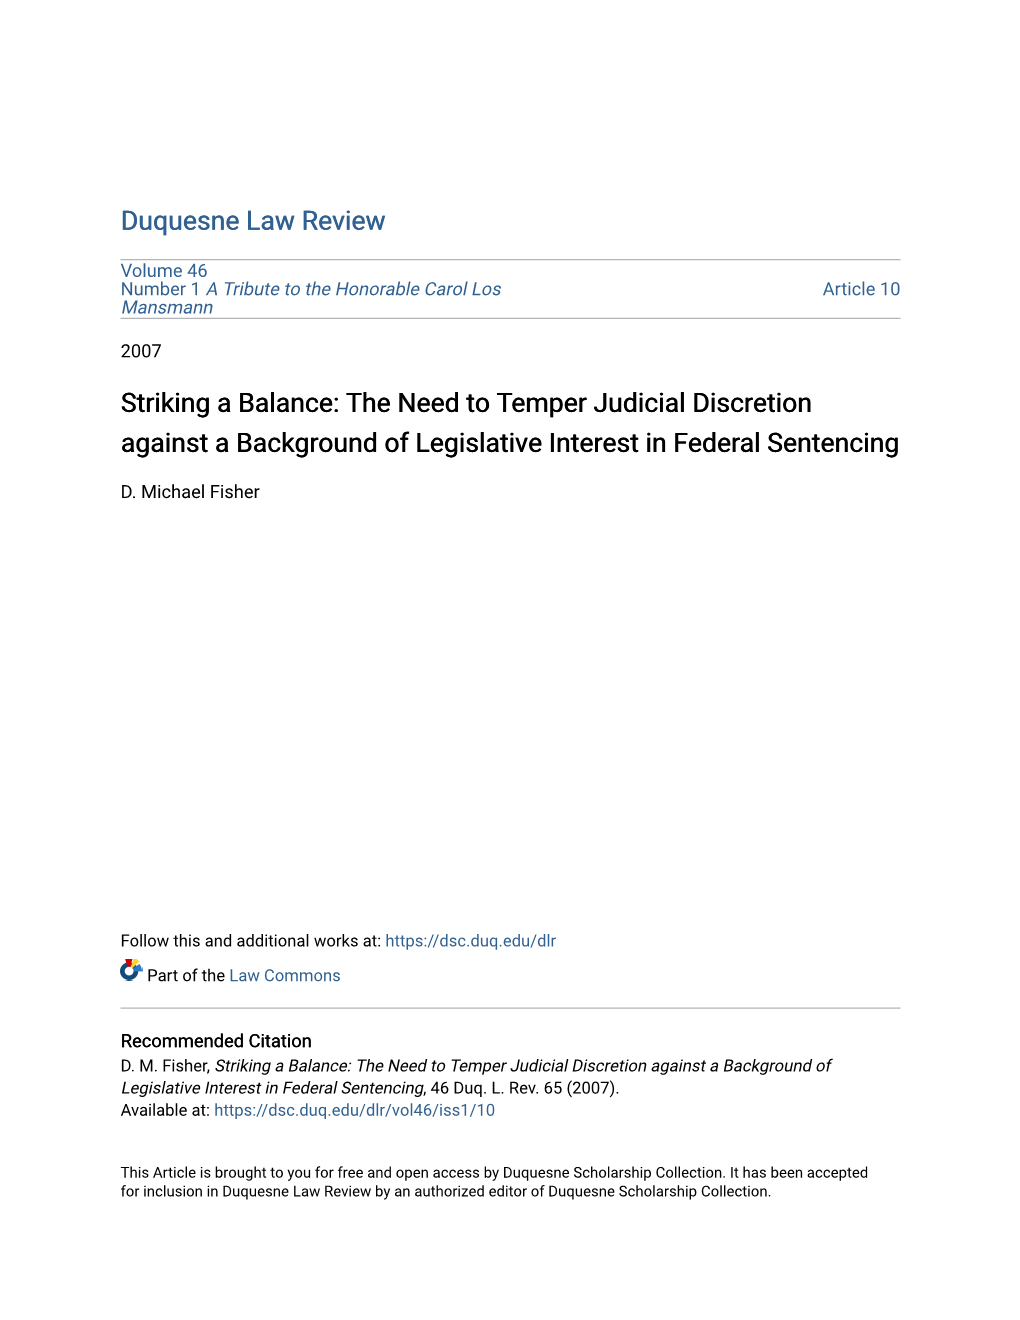 The Need to Temper Judicial Discretion Against a Background of Legislative Interest in Federal Sentencing